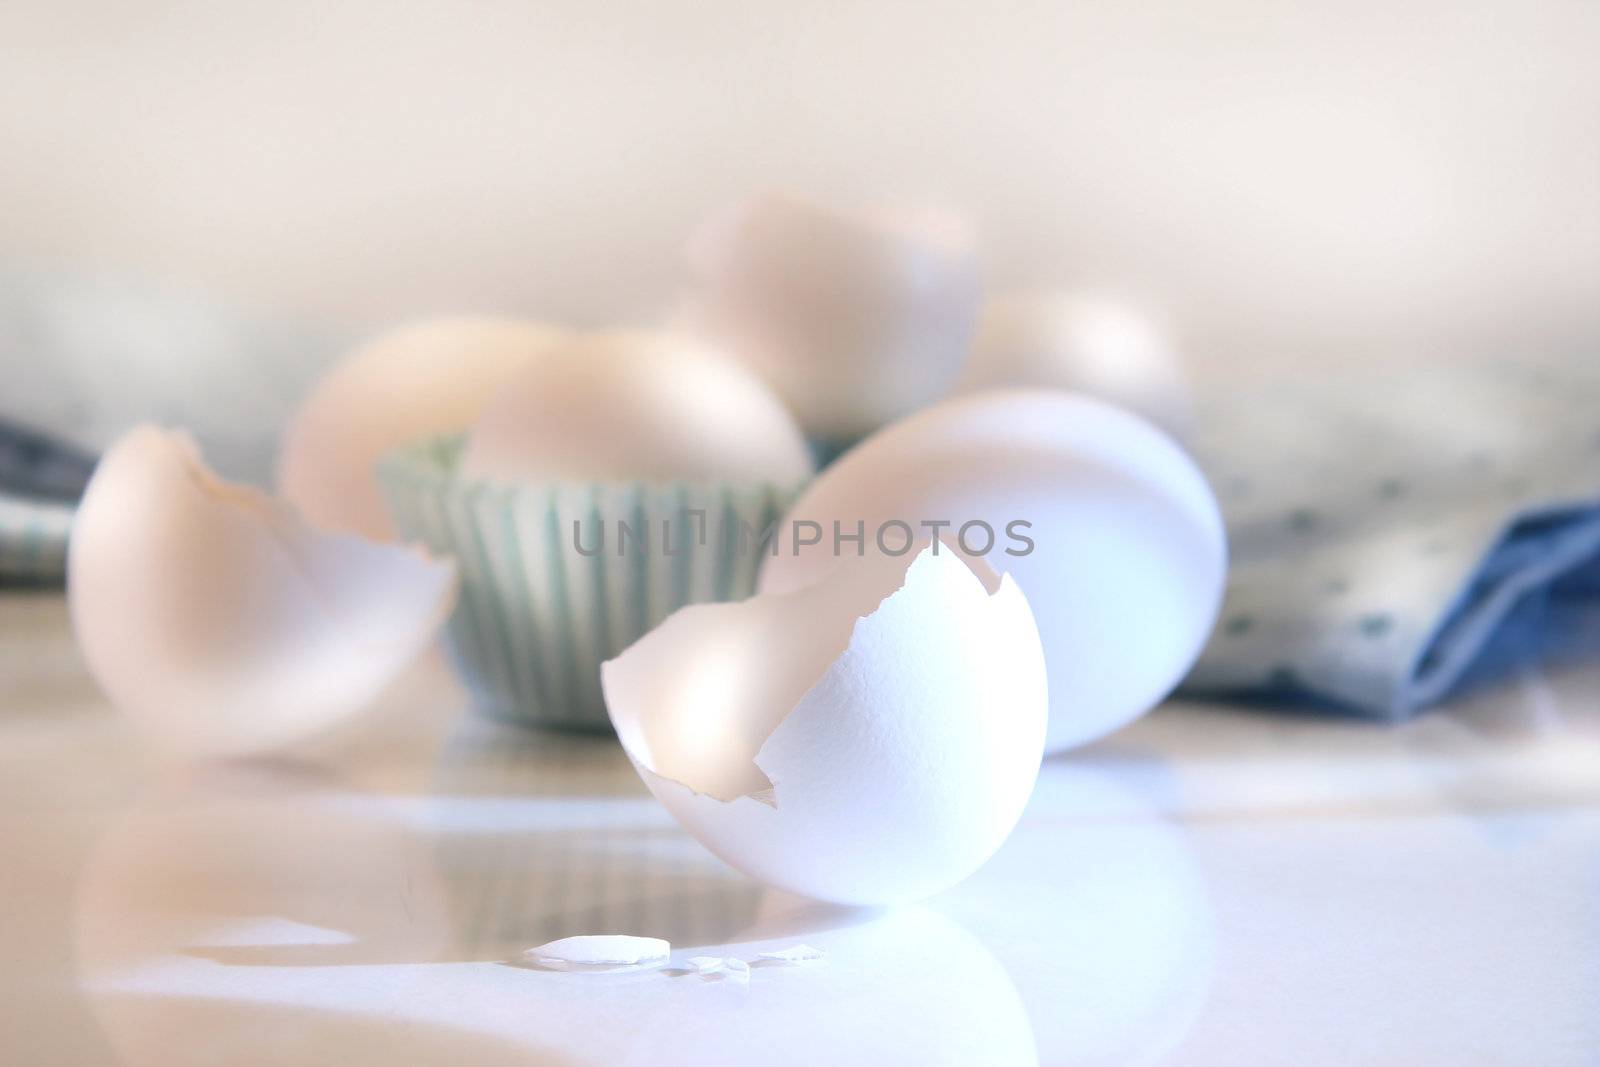 Cracked egg shell on the counter by Sandralise